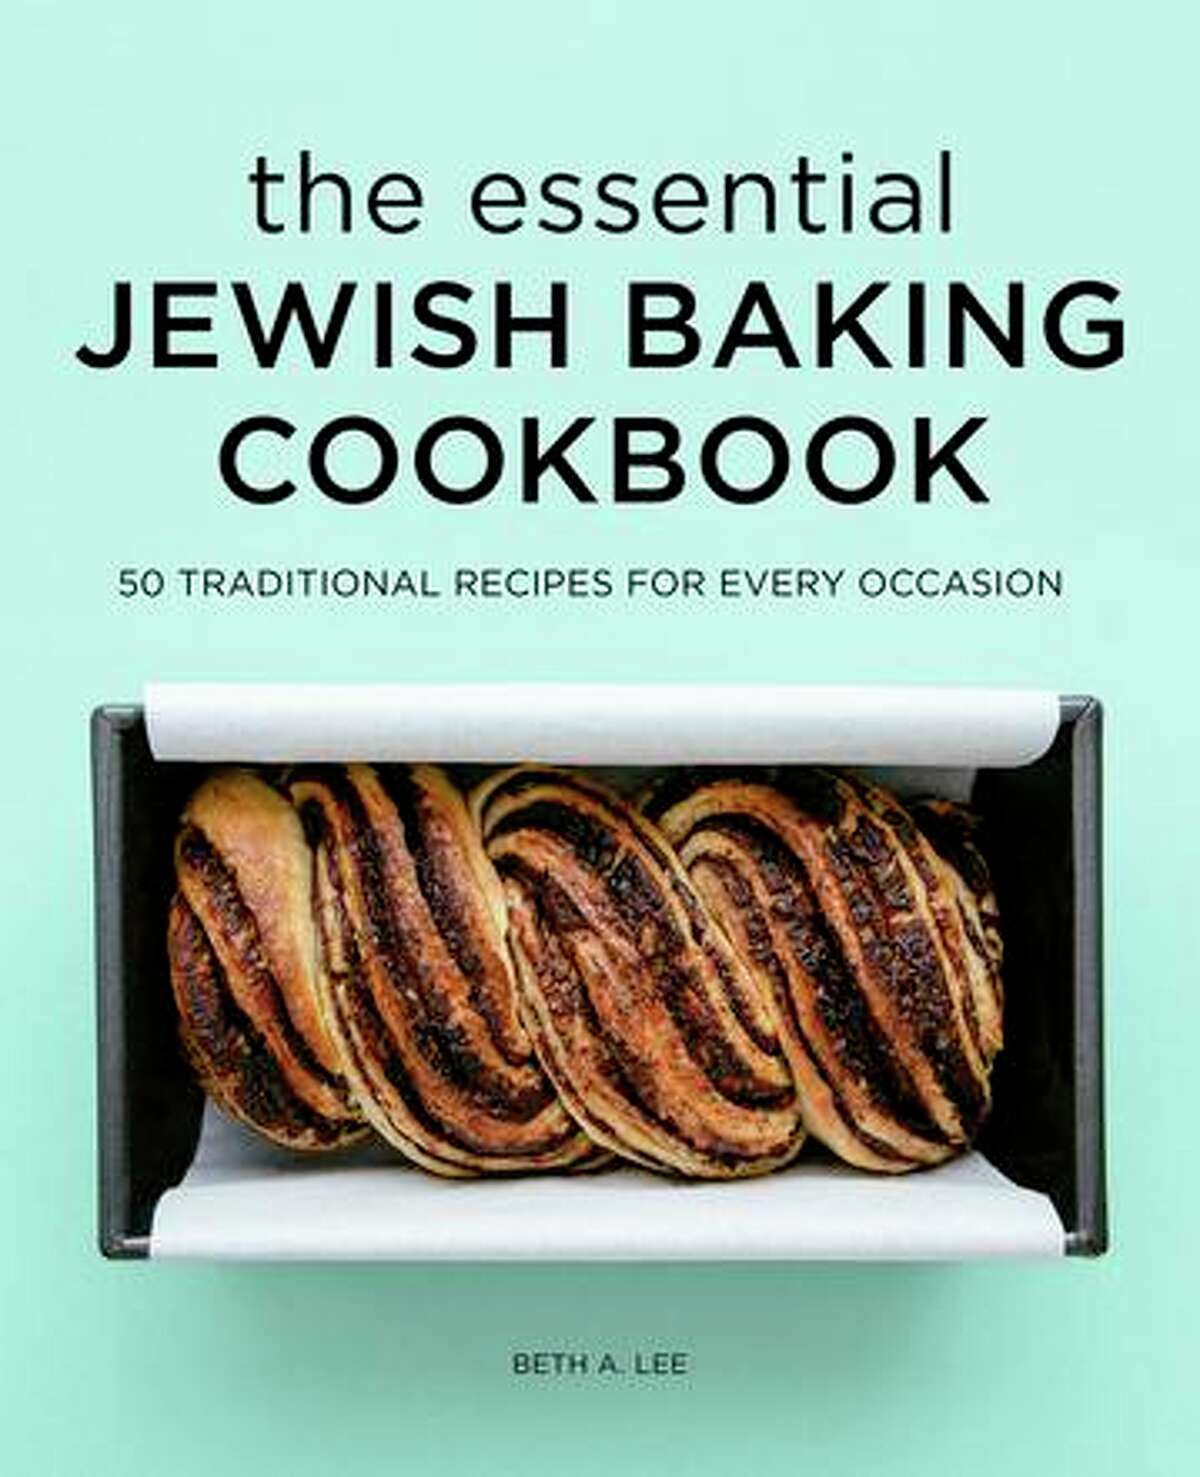 "The Essential Jewish Baking Cookbook" by South Bay food blogger Beth Lee includes 50 recipes.